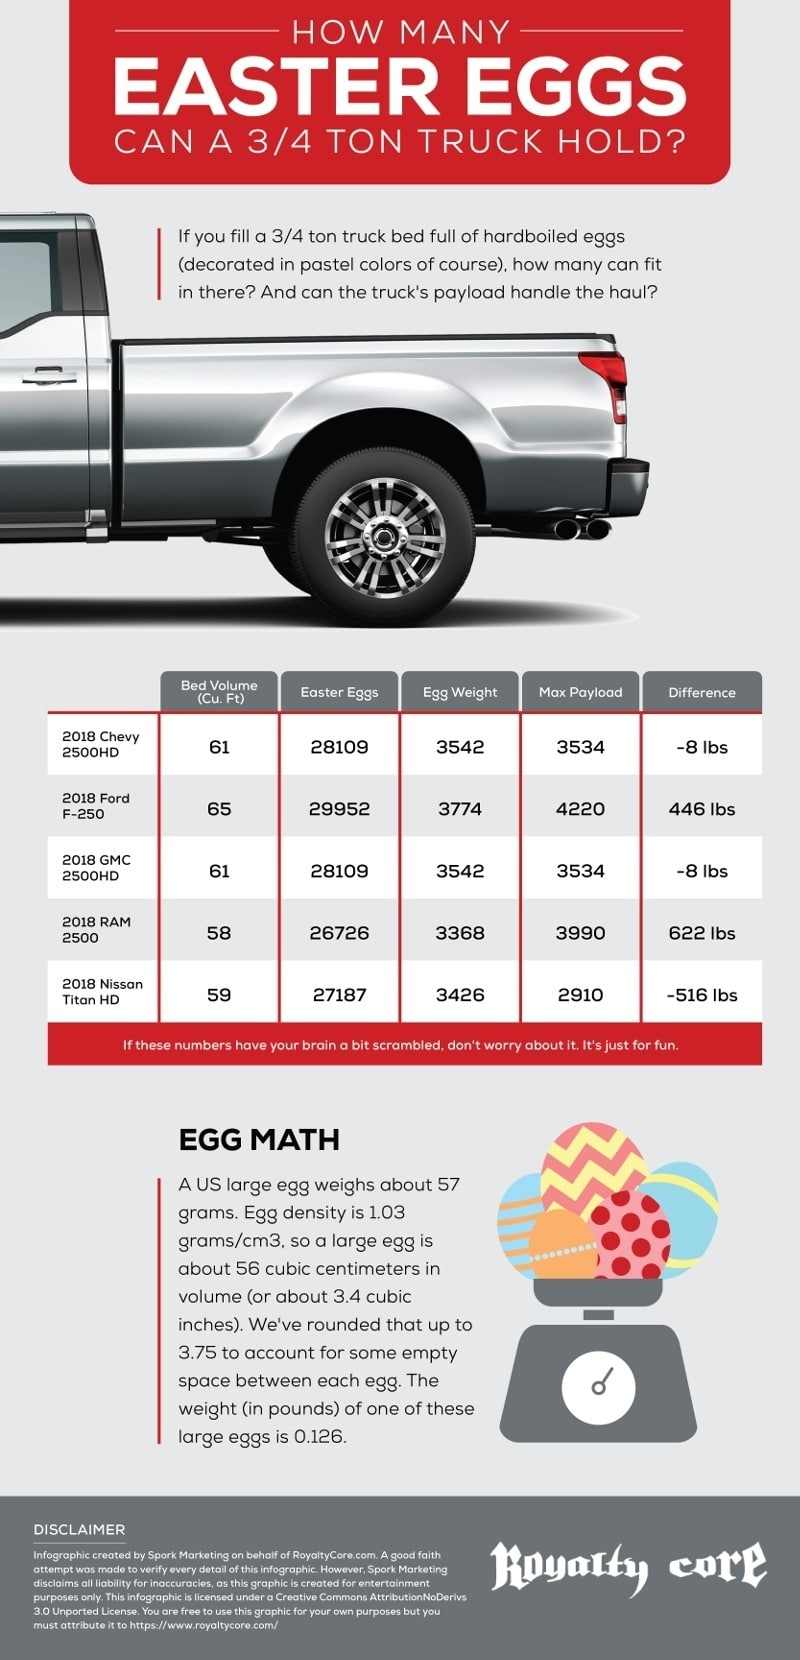 How many Easter eggs can your favorite HD truck deliver